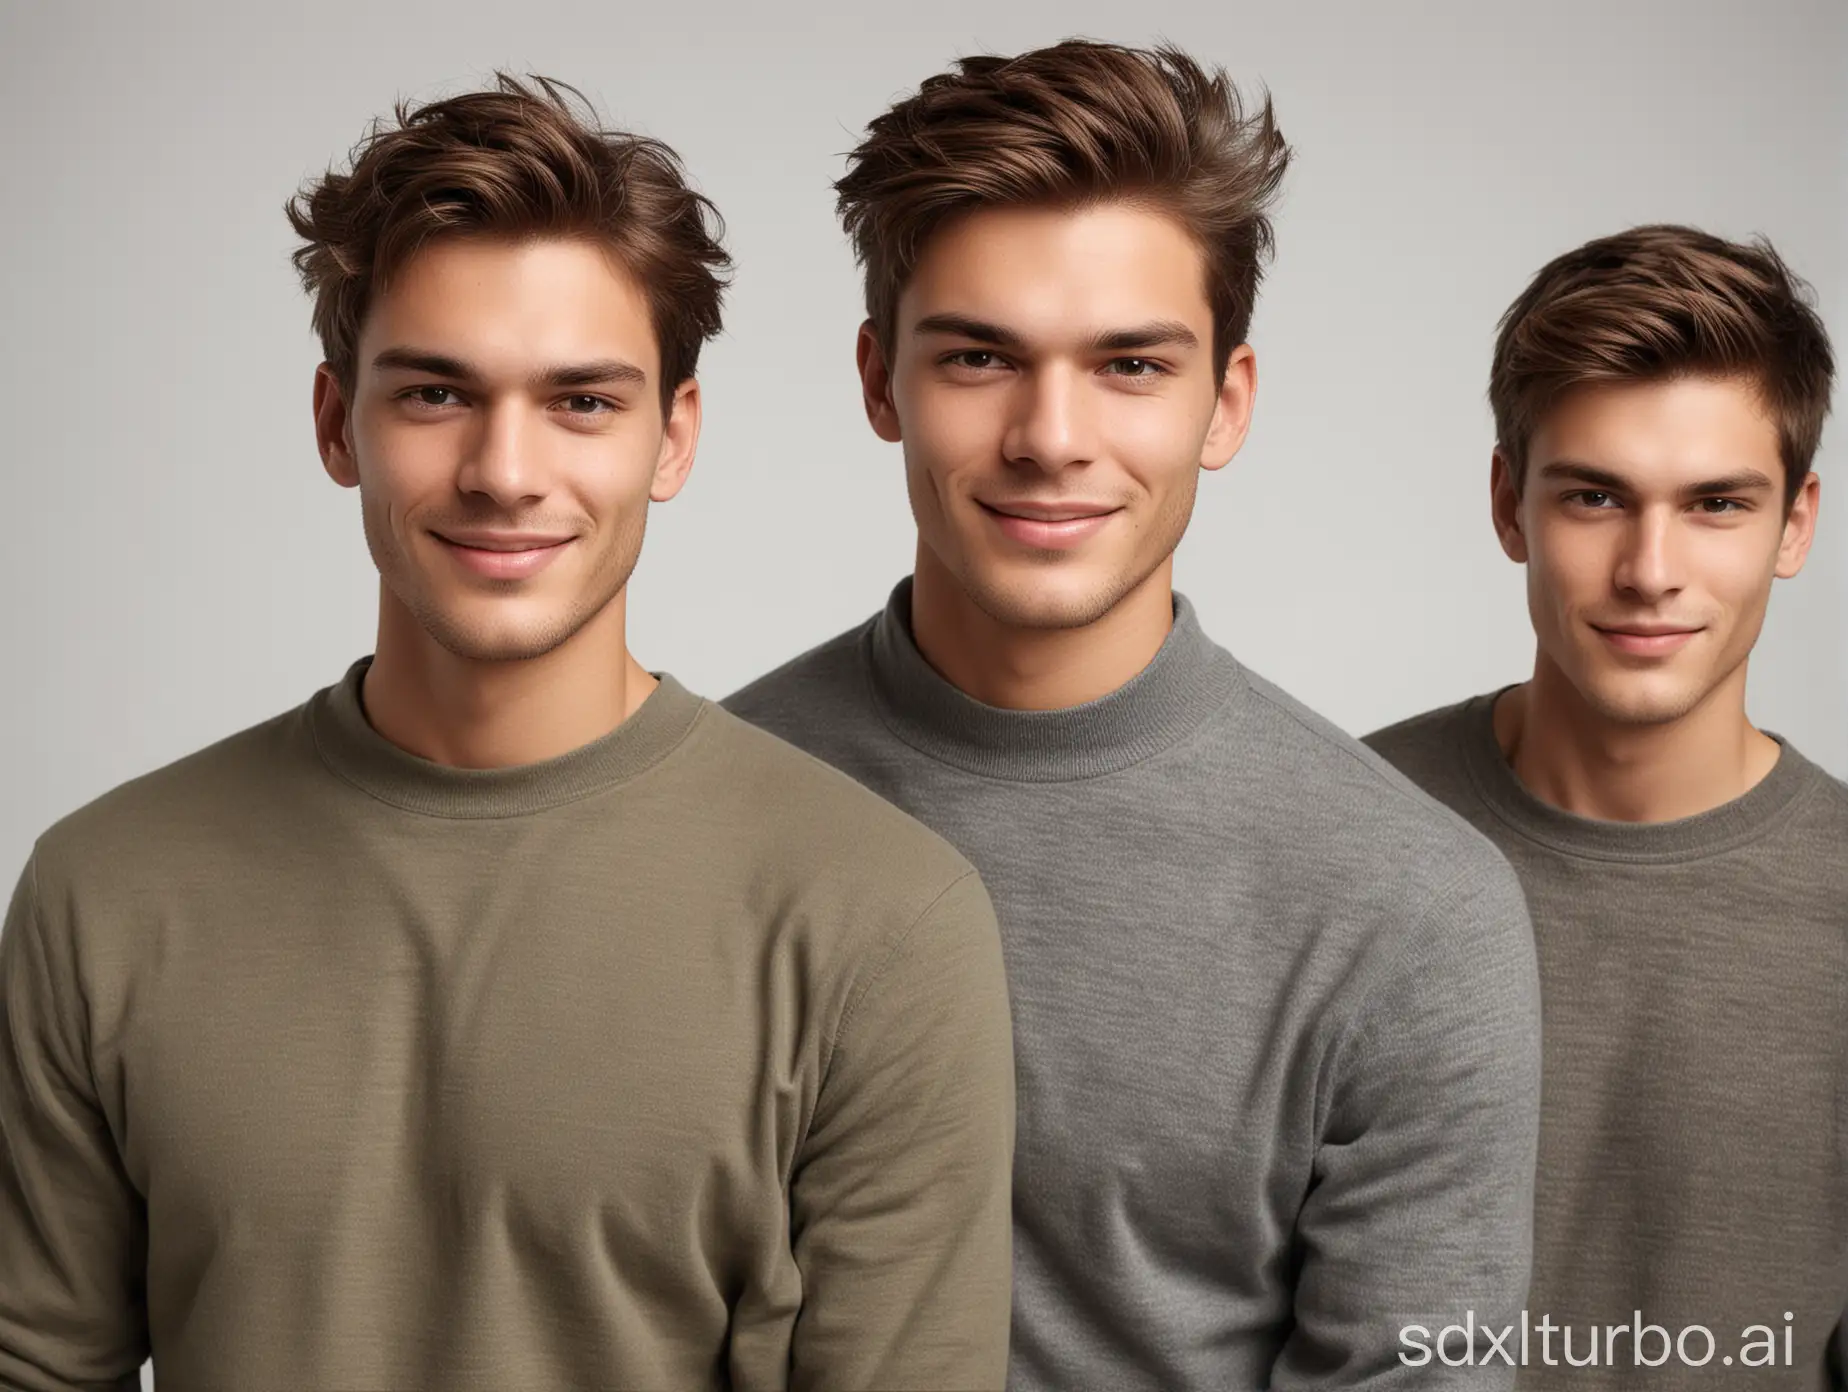 Create an image of three male models in a studio setting. The central figure should have short brown hair, with two others flanking him, one smiling and the other looking serious. Keep the background plain white.